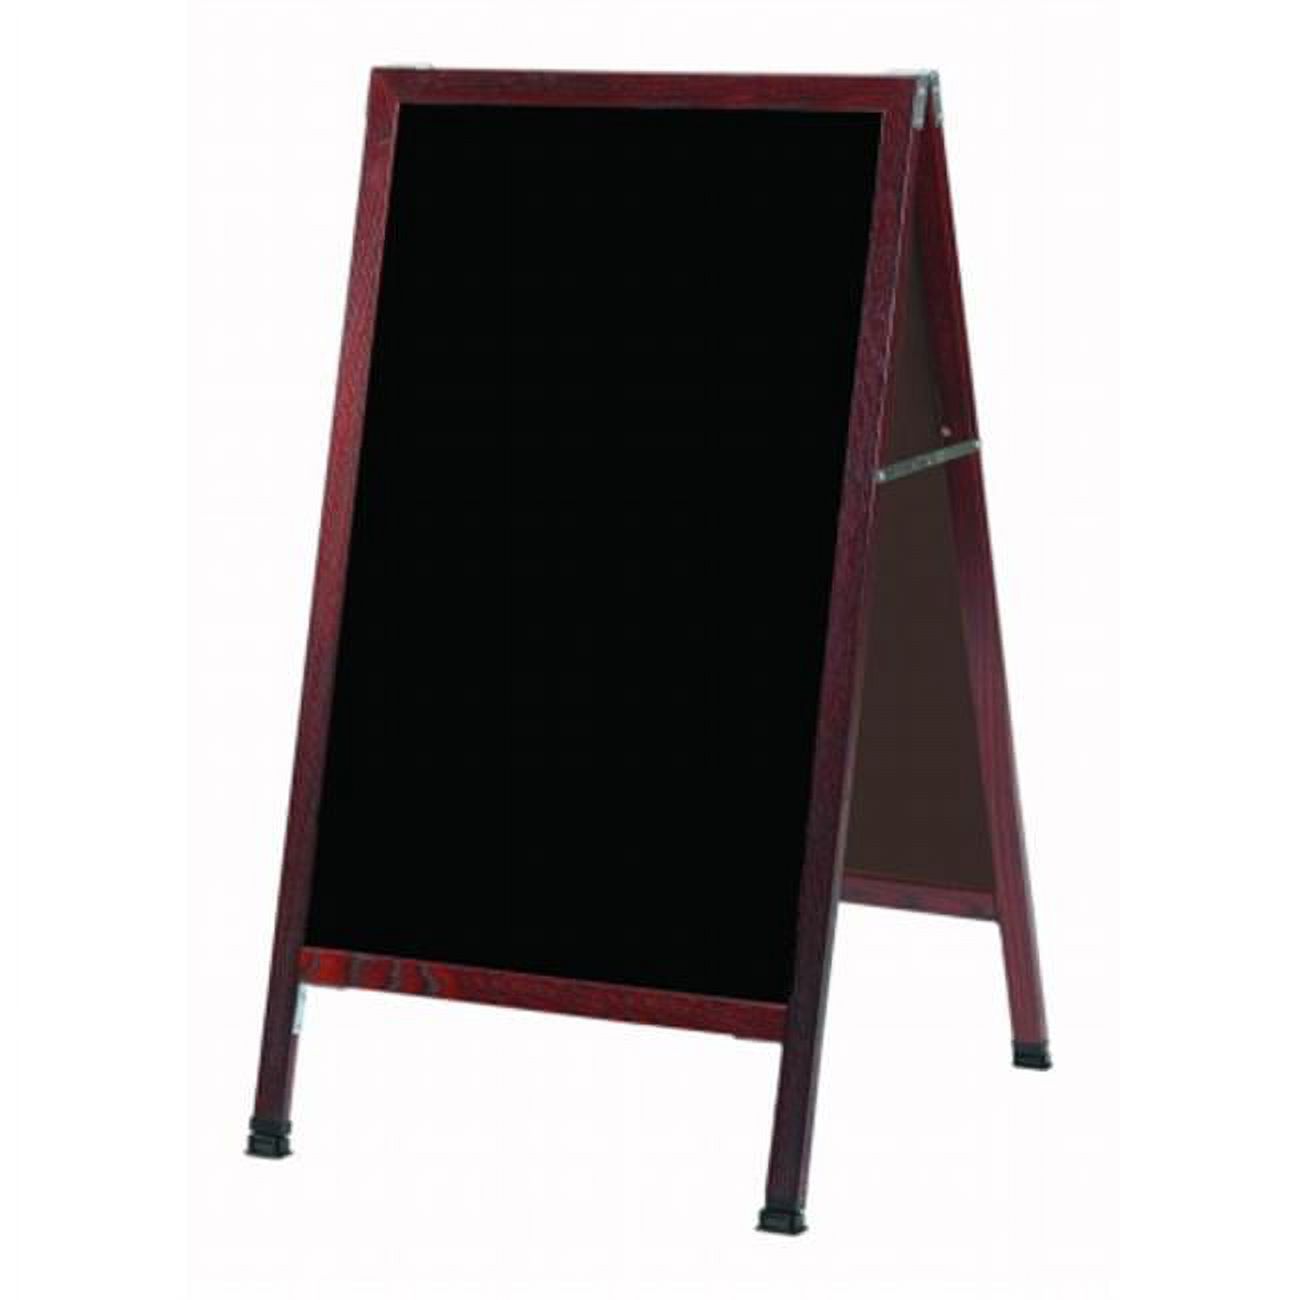 Aarco Products  Inc. MA-5SB A-Frame Sidewalk Board Features a Black Porcelain Markerboard and Solid Red Oak Frame with Cherry Stain. Size 42 in.Hx24 in.W - image 1 of 1